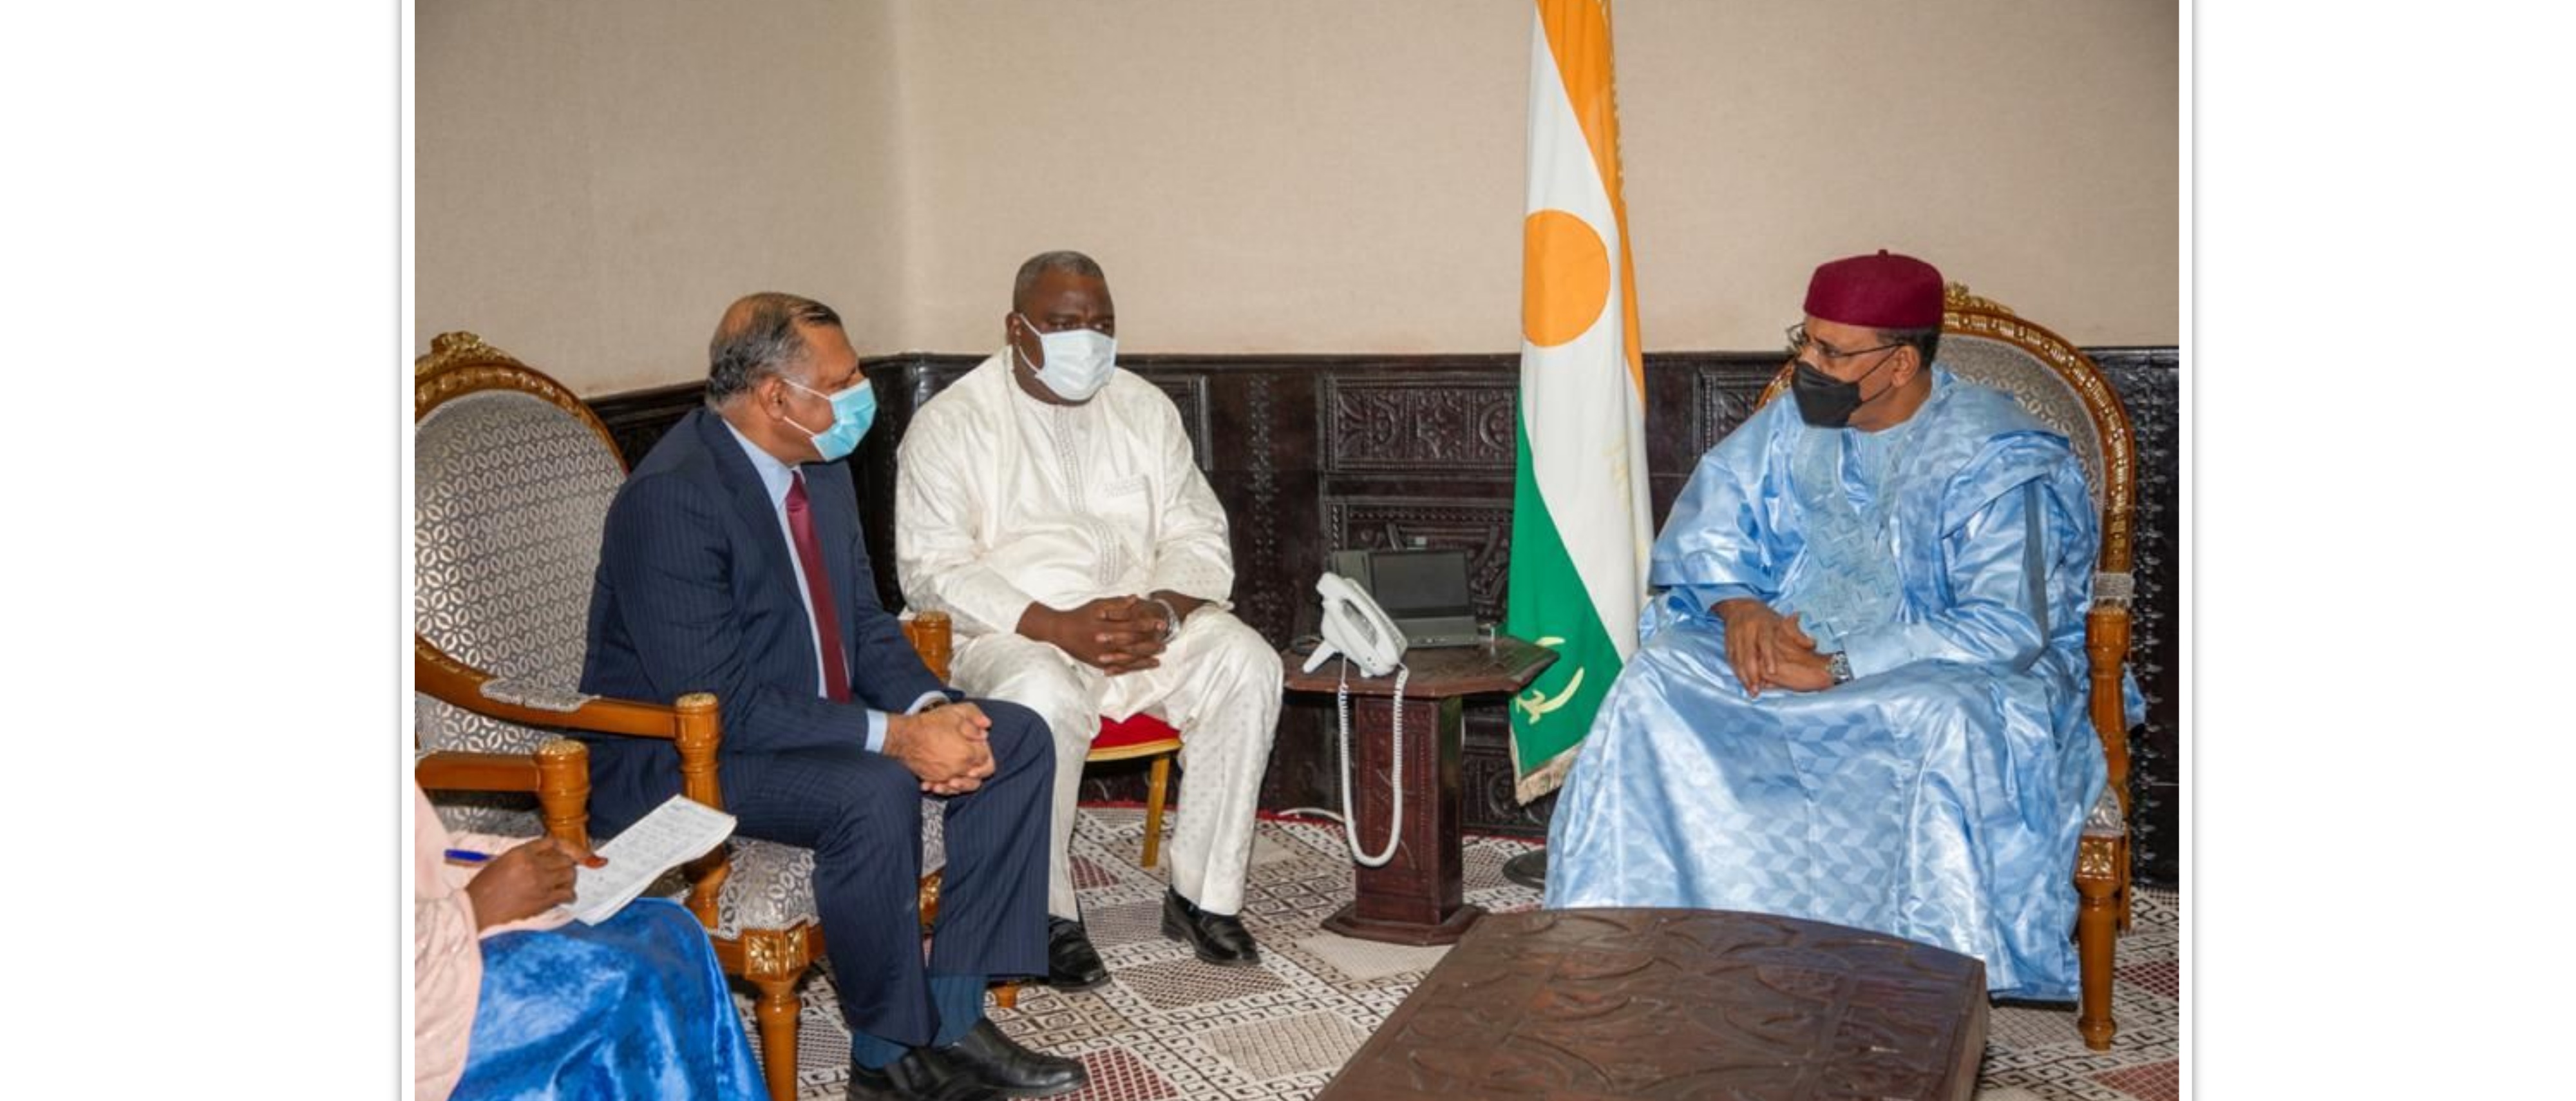  Ambassador Nair with the President of the Republic of Niger, H.E. Mr. Mohamed Bazoum